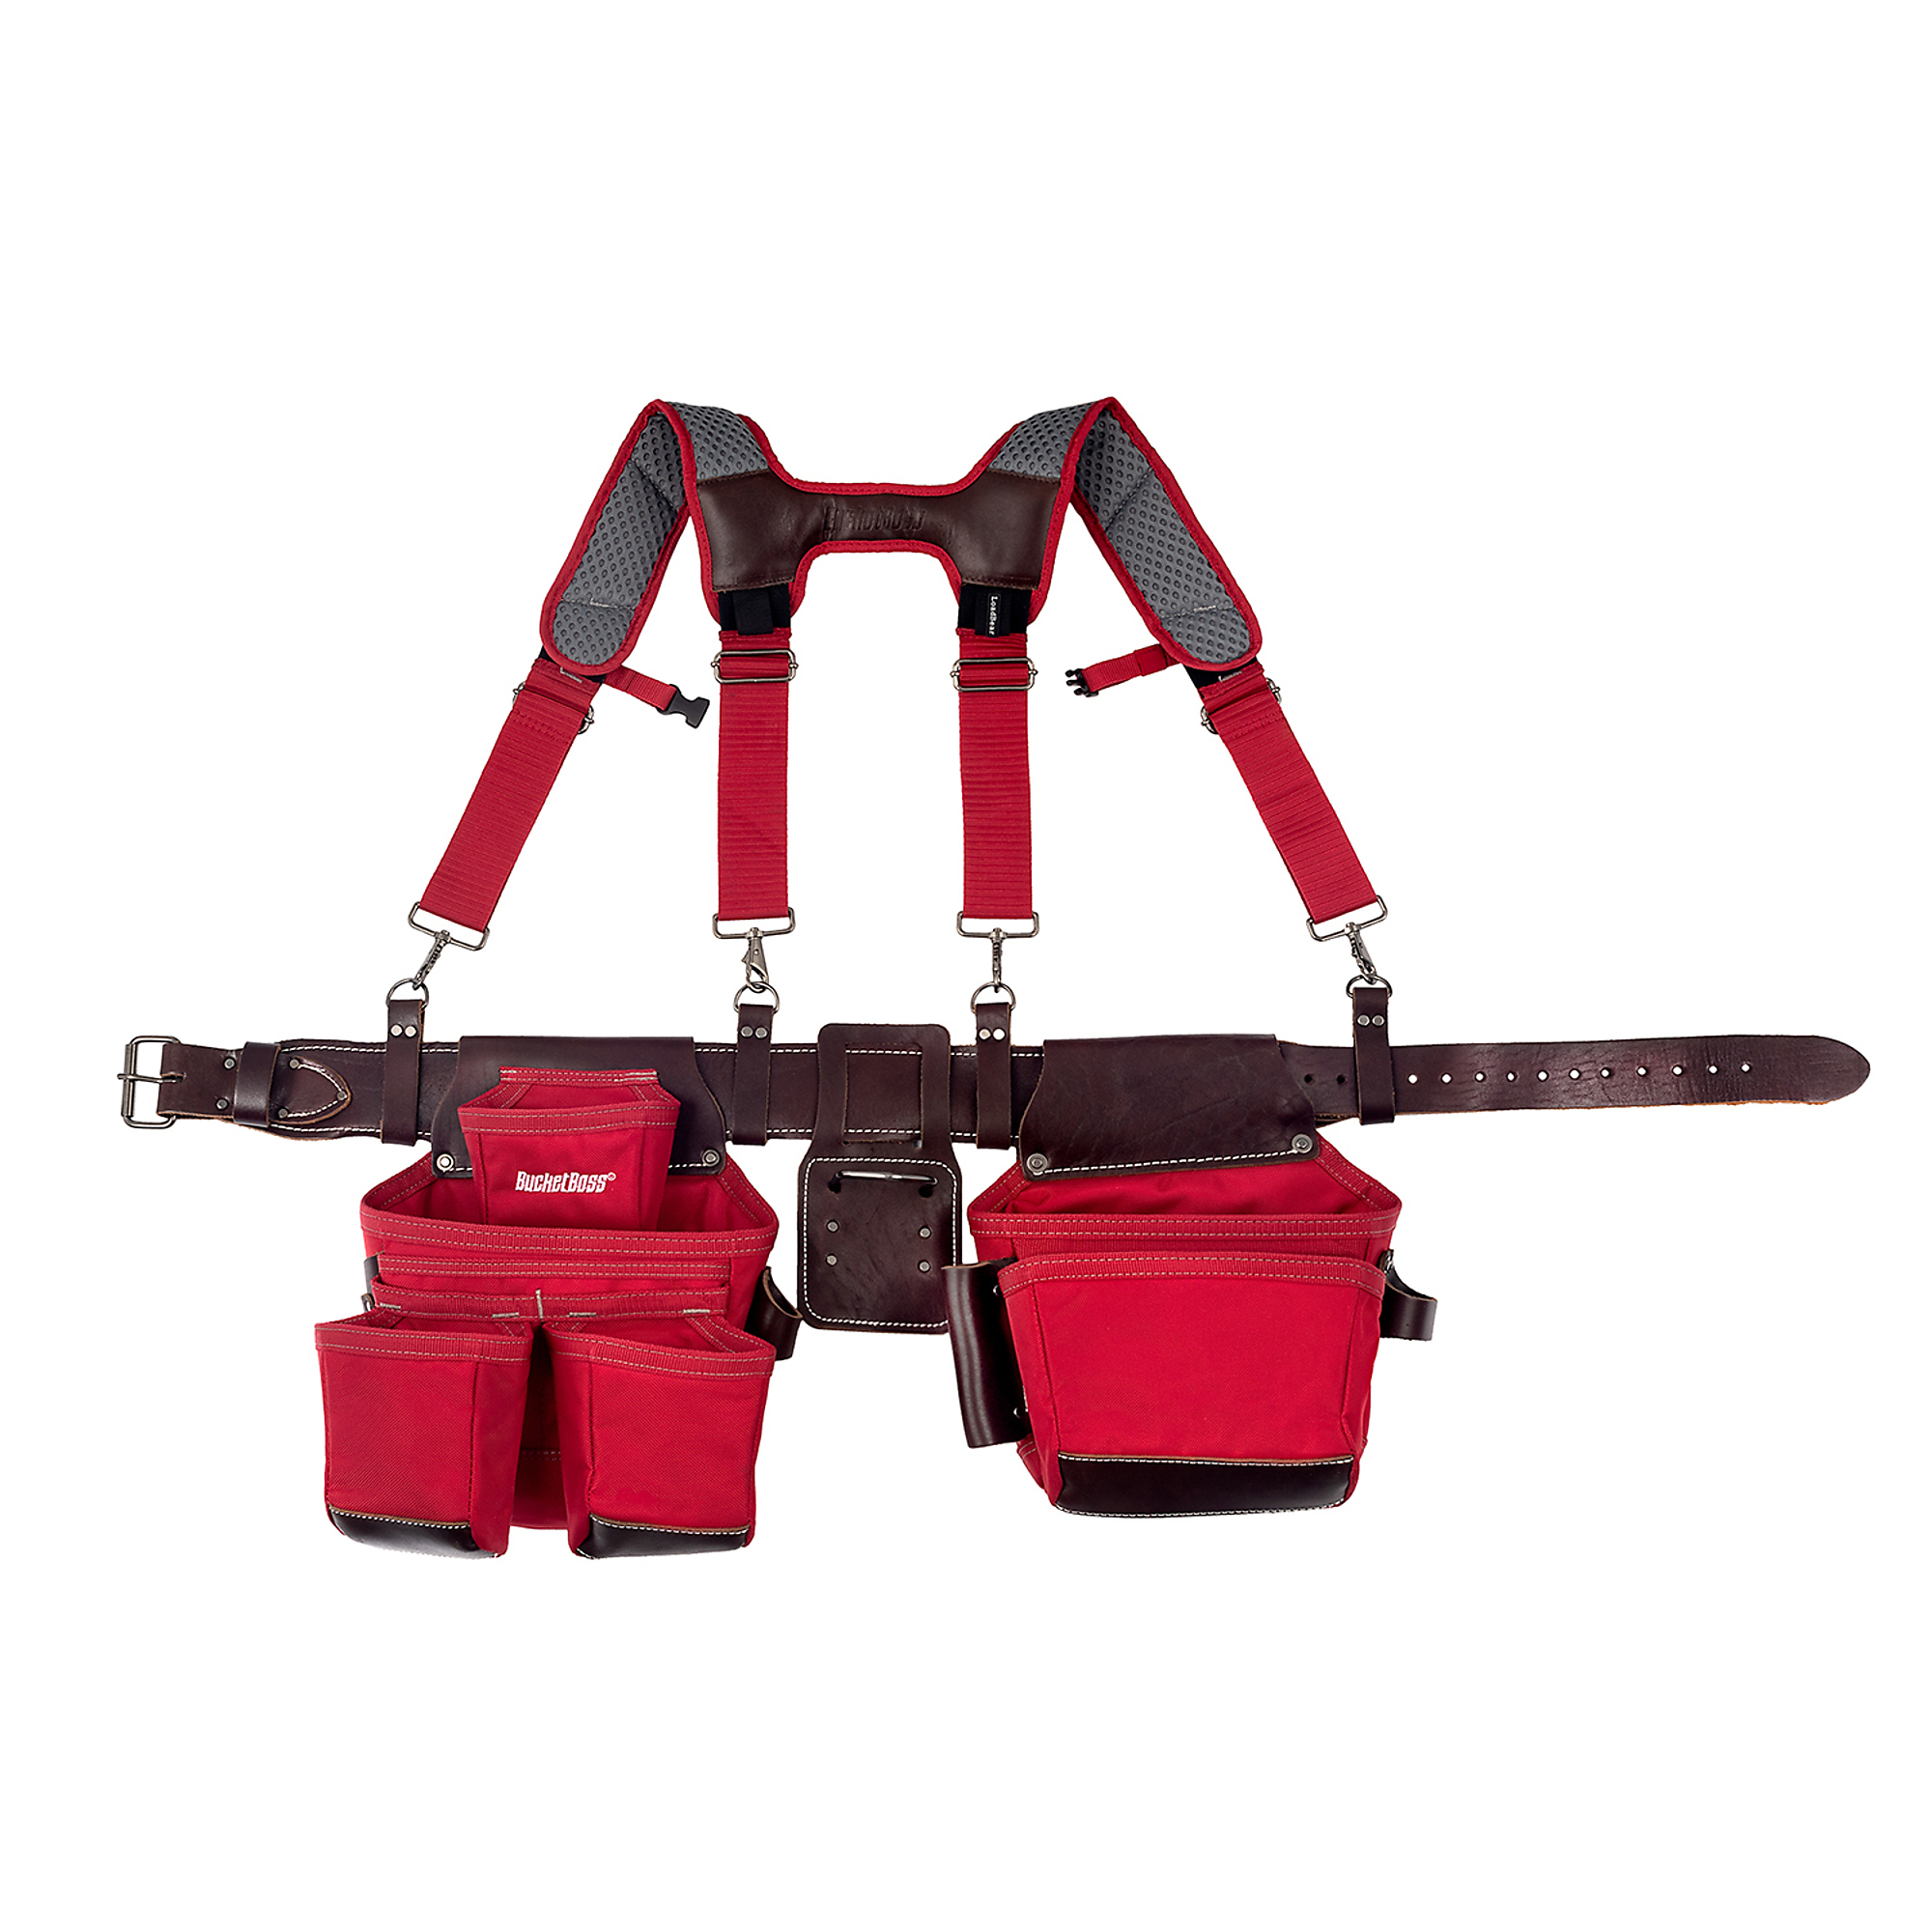 Bucket Boss, Tool Belt with Suspenders, Color Red, Pockets (qty.) 19 Material Leather, Model 55505-RD